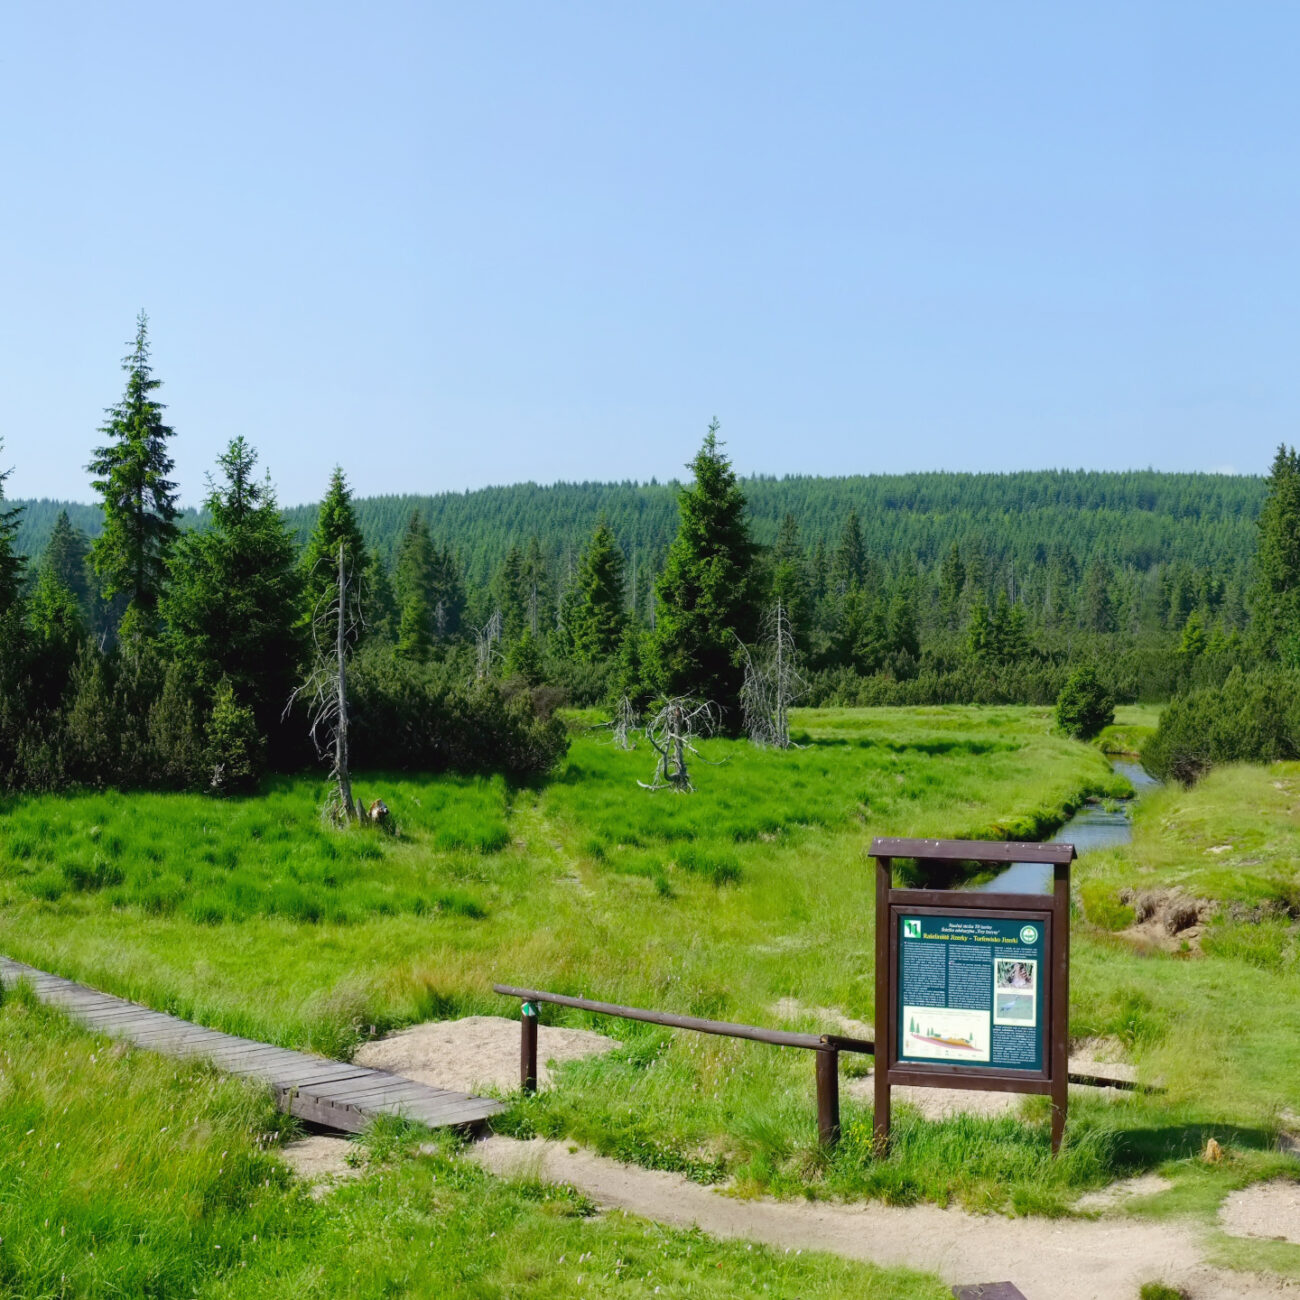 The picturesque view at Jizera mountains in summer.